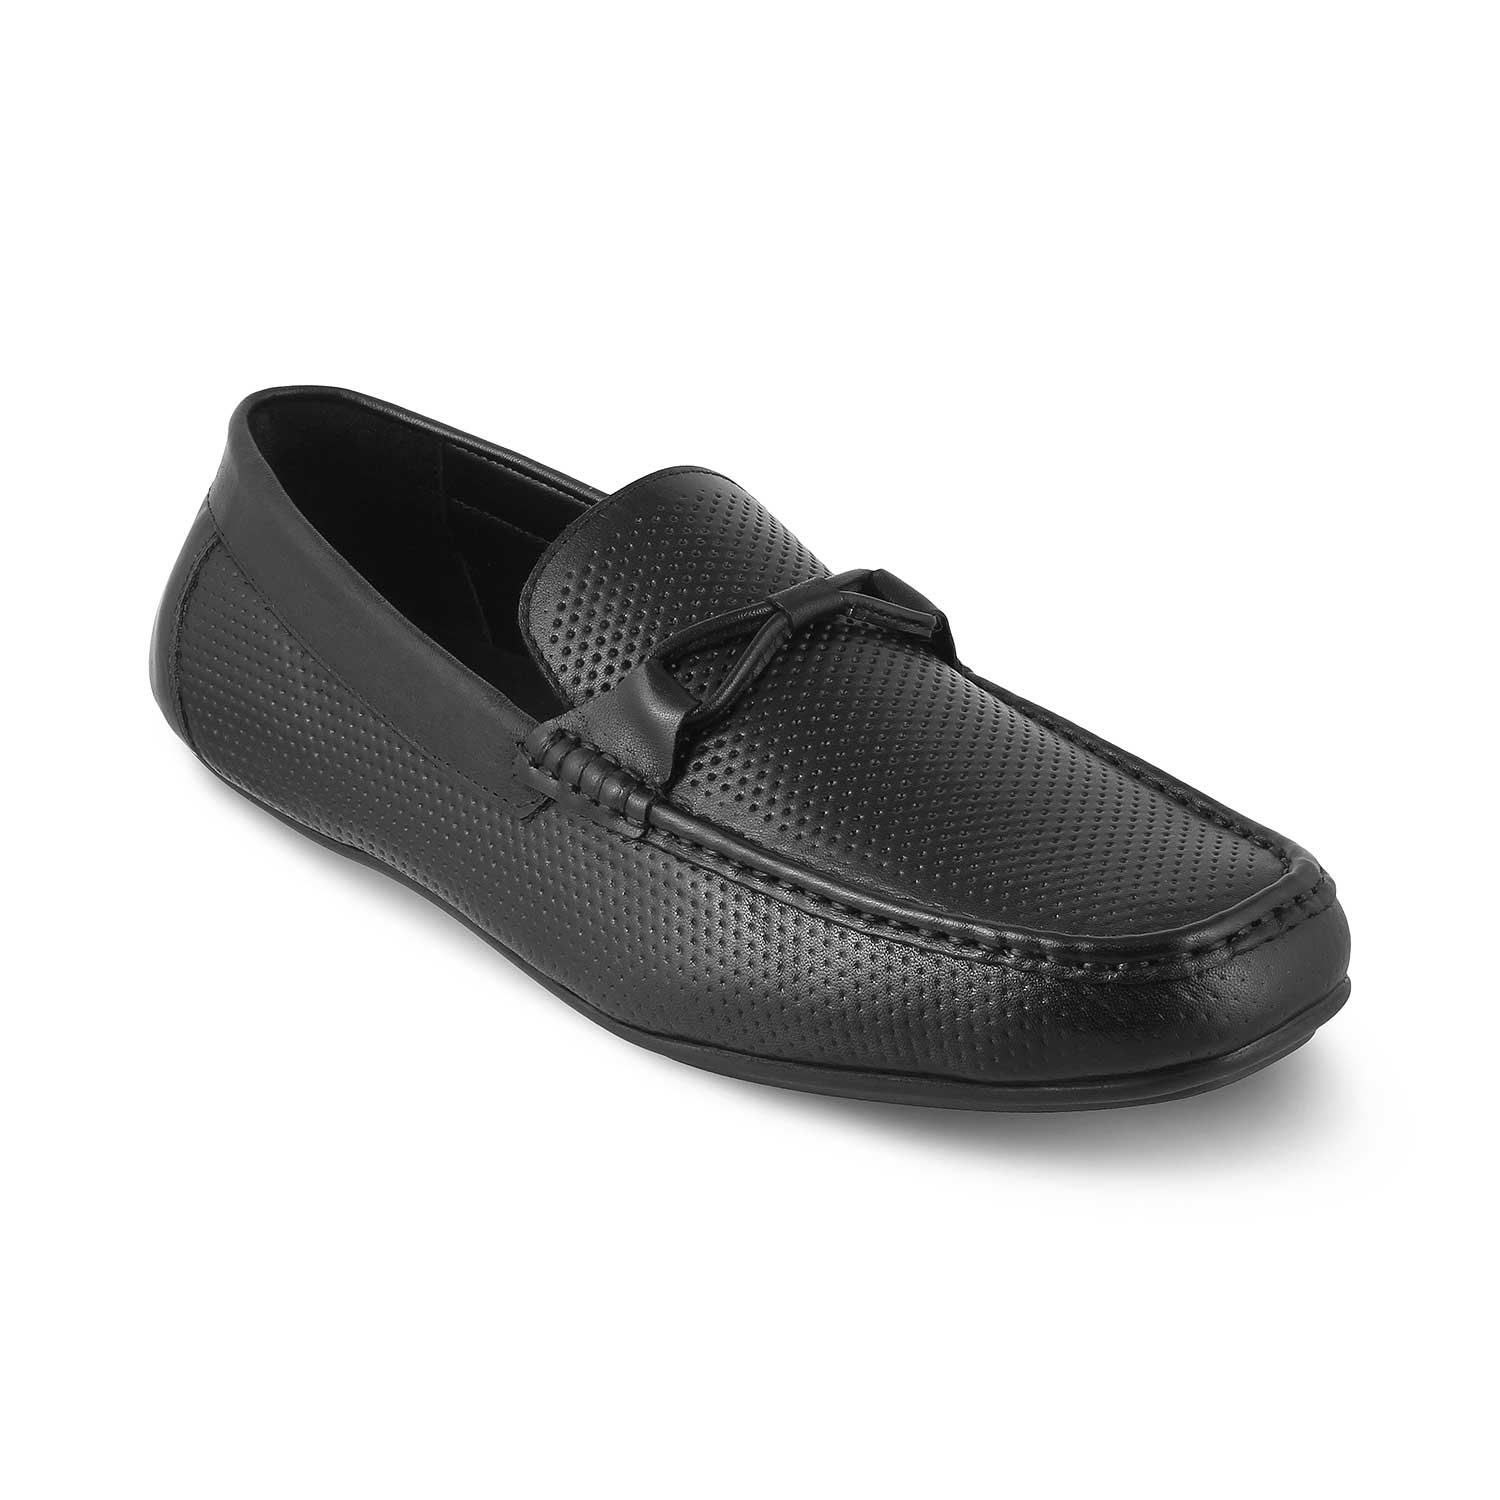 Tresmode-The Yoti Black Men's Leather Driving Loafers Tresmode-Tresmode